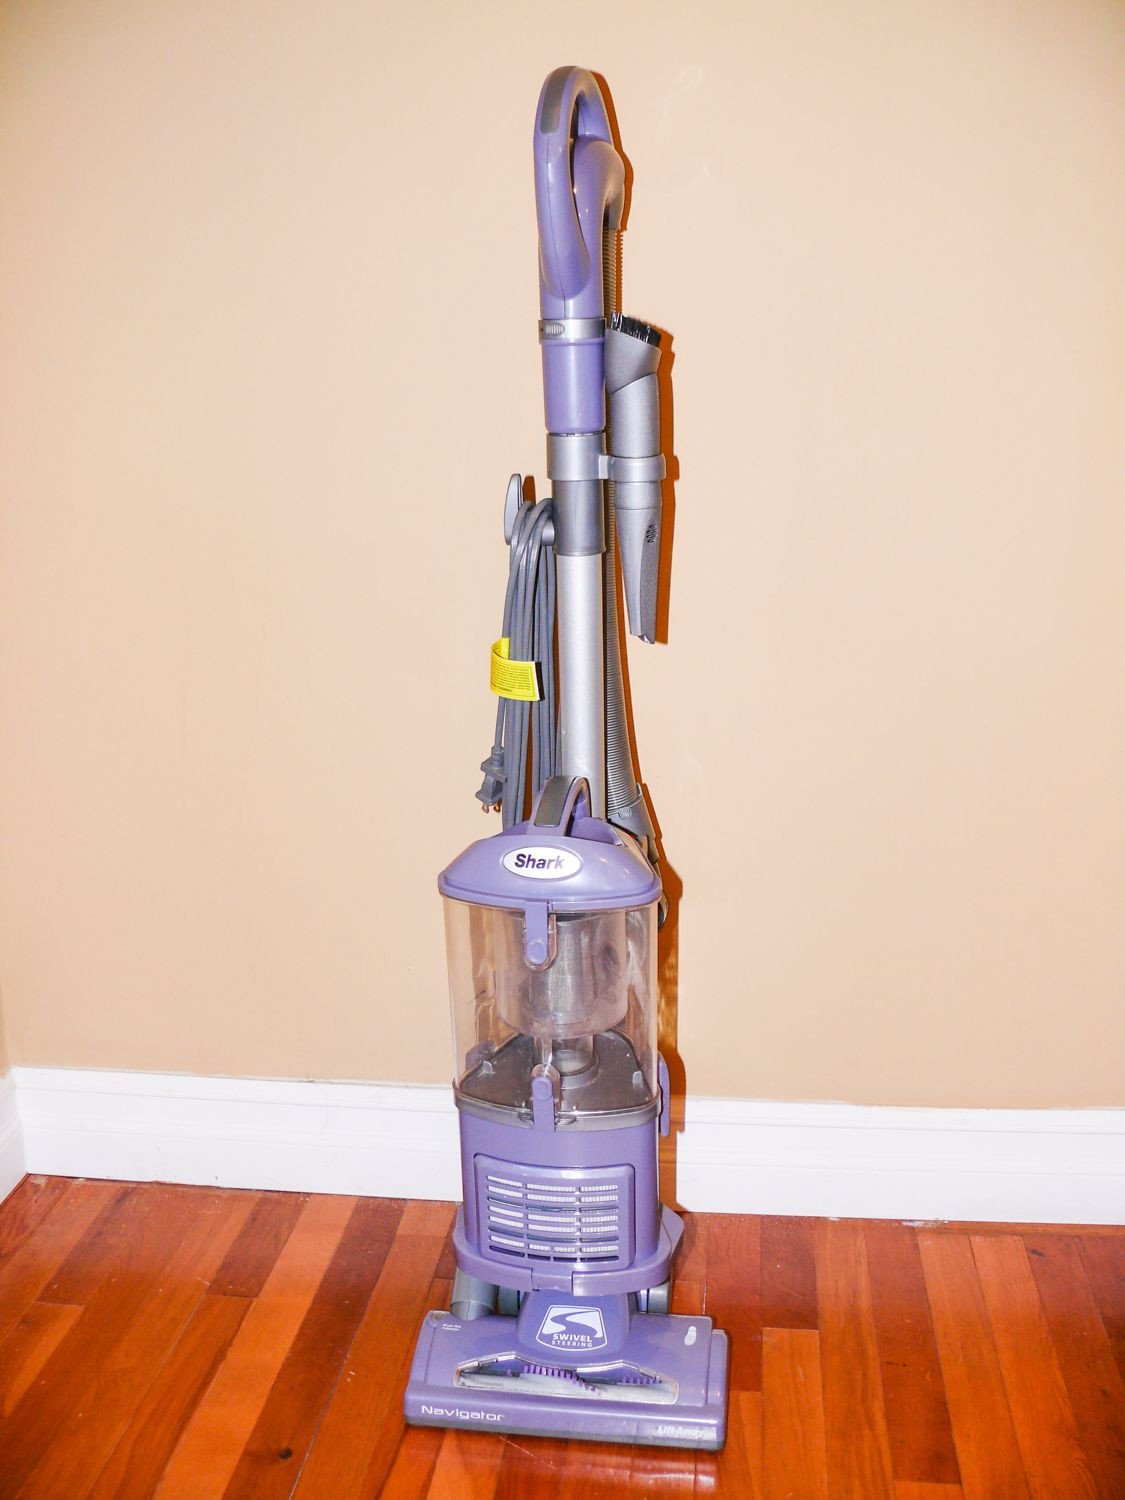 Hardwood Floor Cleaning Machine Reviews Of the 10 Best Vacuum Cleaners to Buy In 2018 Regarding 4062974 2 4 5bbf71b6c9e77c00511018e2